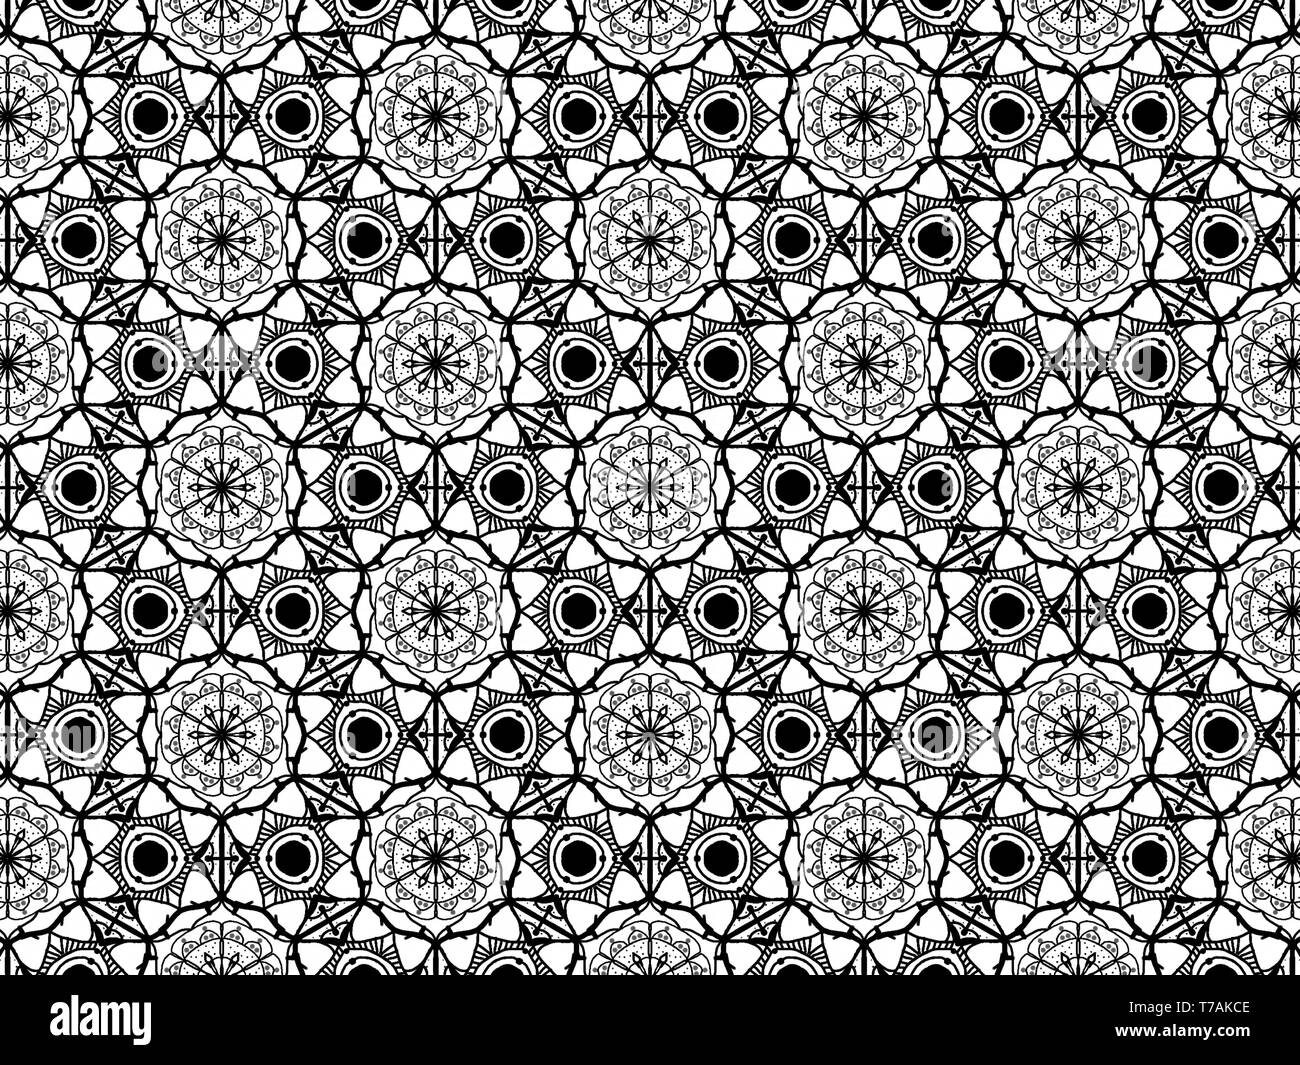 Seamless pattern lace for fabric, white and black color.Illustration. Stock Photo